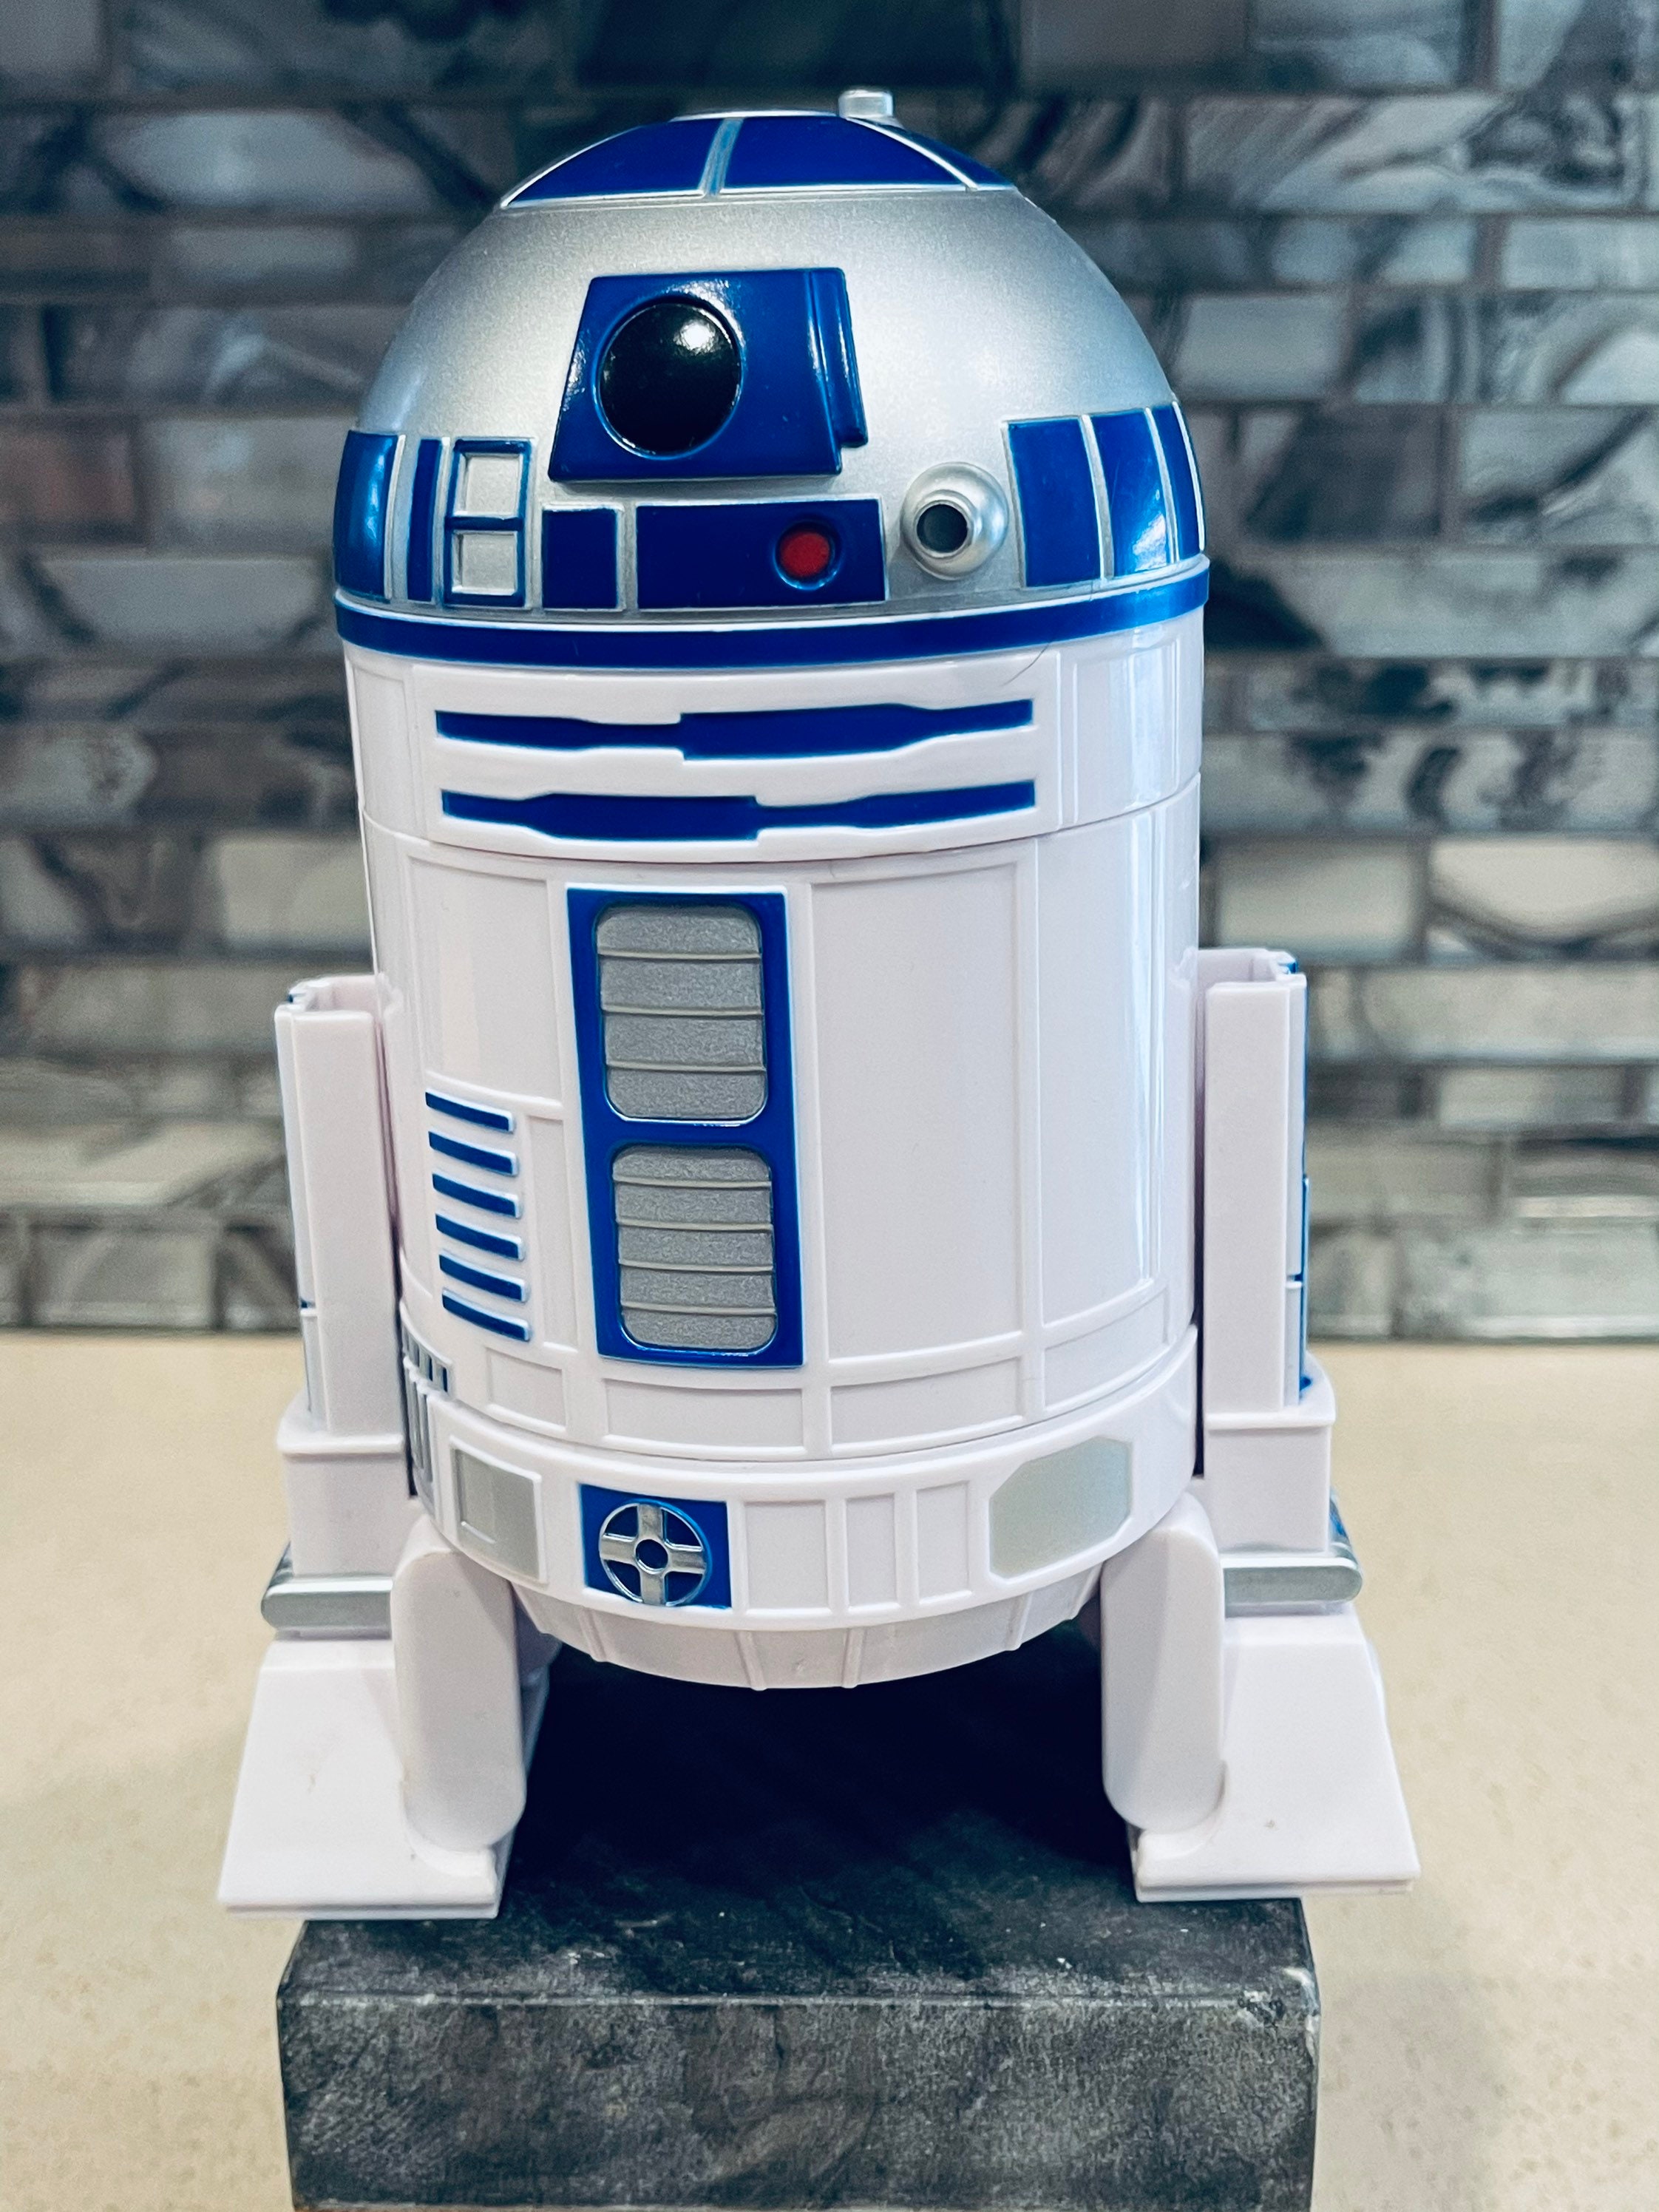 Think Geek Star Wars Disney R2D2 Measuring Cups and Spoons Set Stackable  Kitchen Baking Accessories Collectible Novelty 